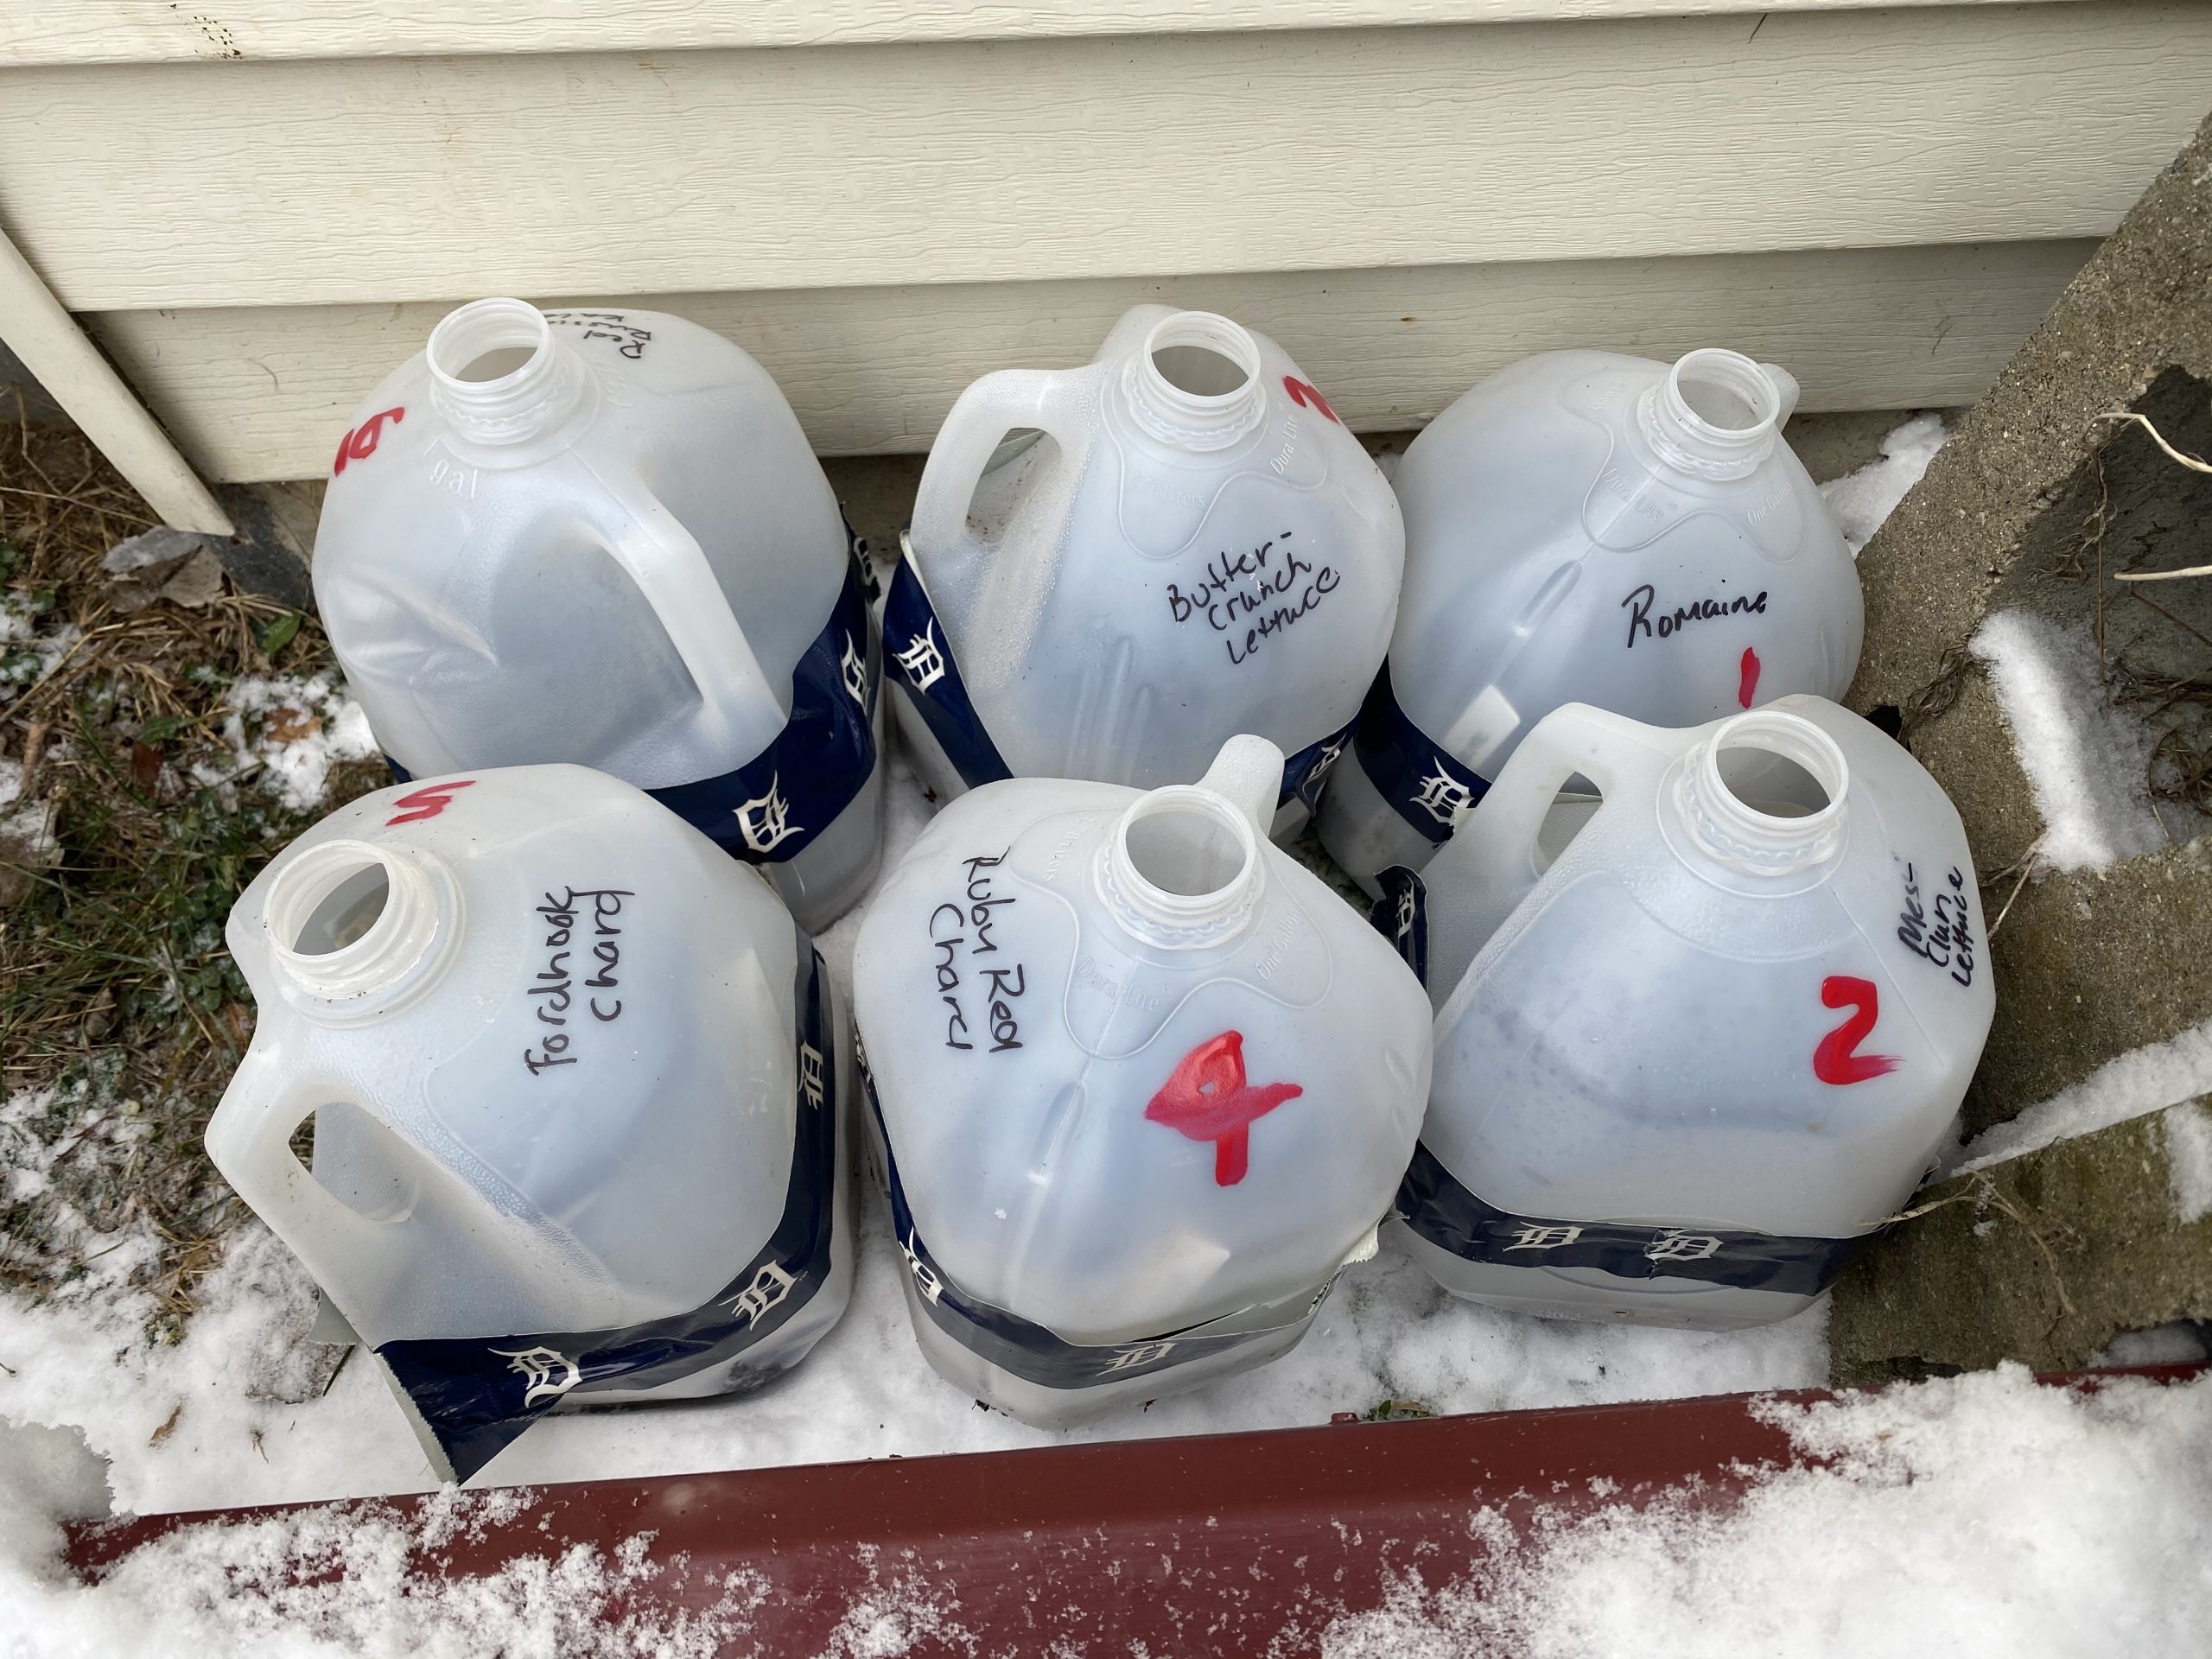 Winter-sowed jugs outside in the snow